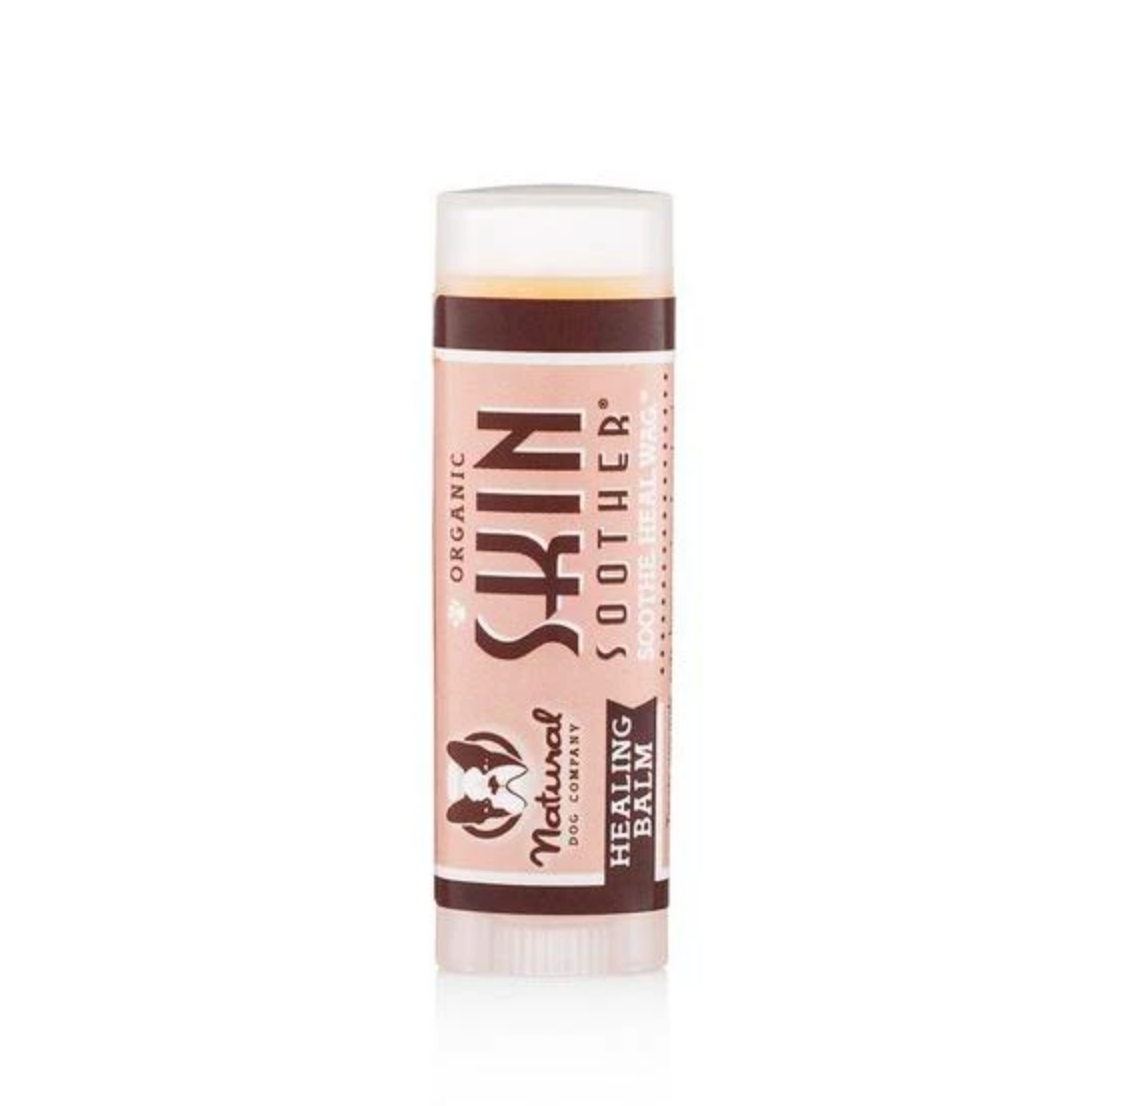 Skin Soother Travel Stick